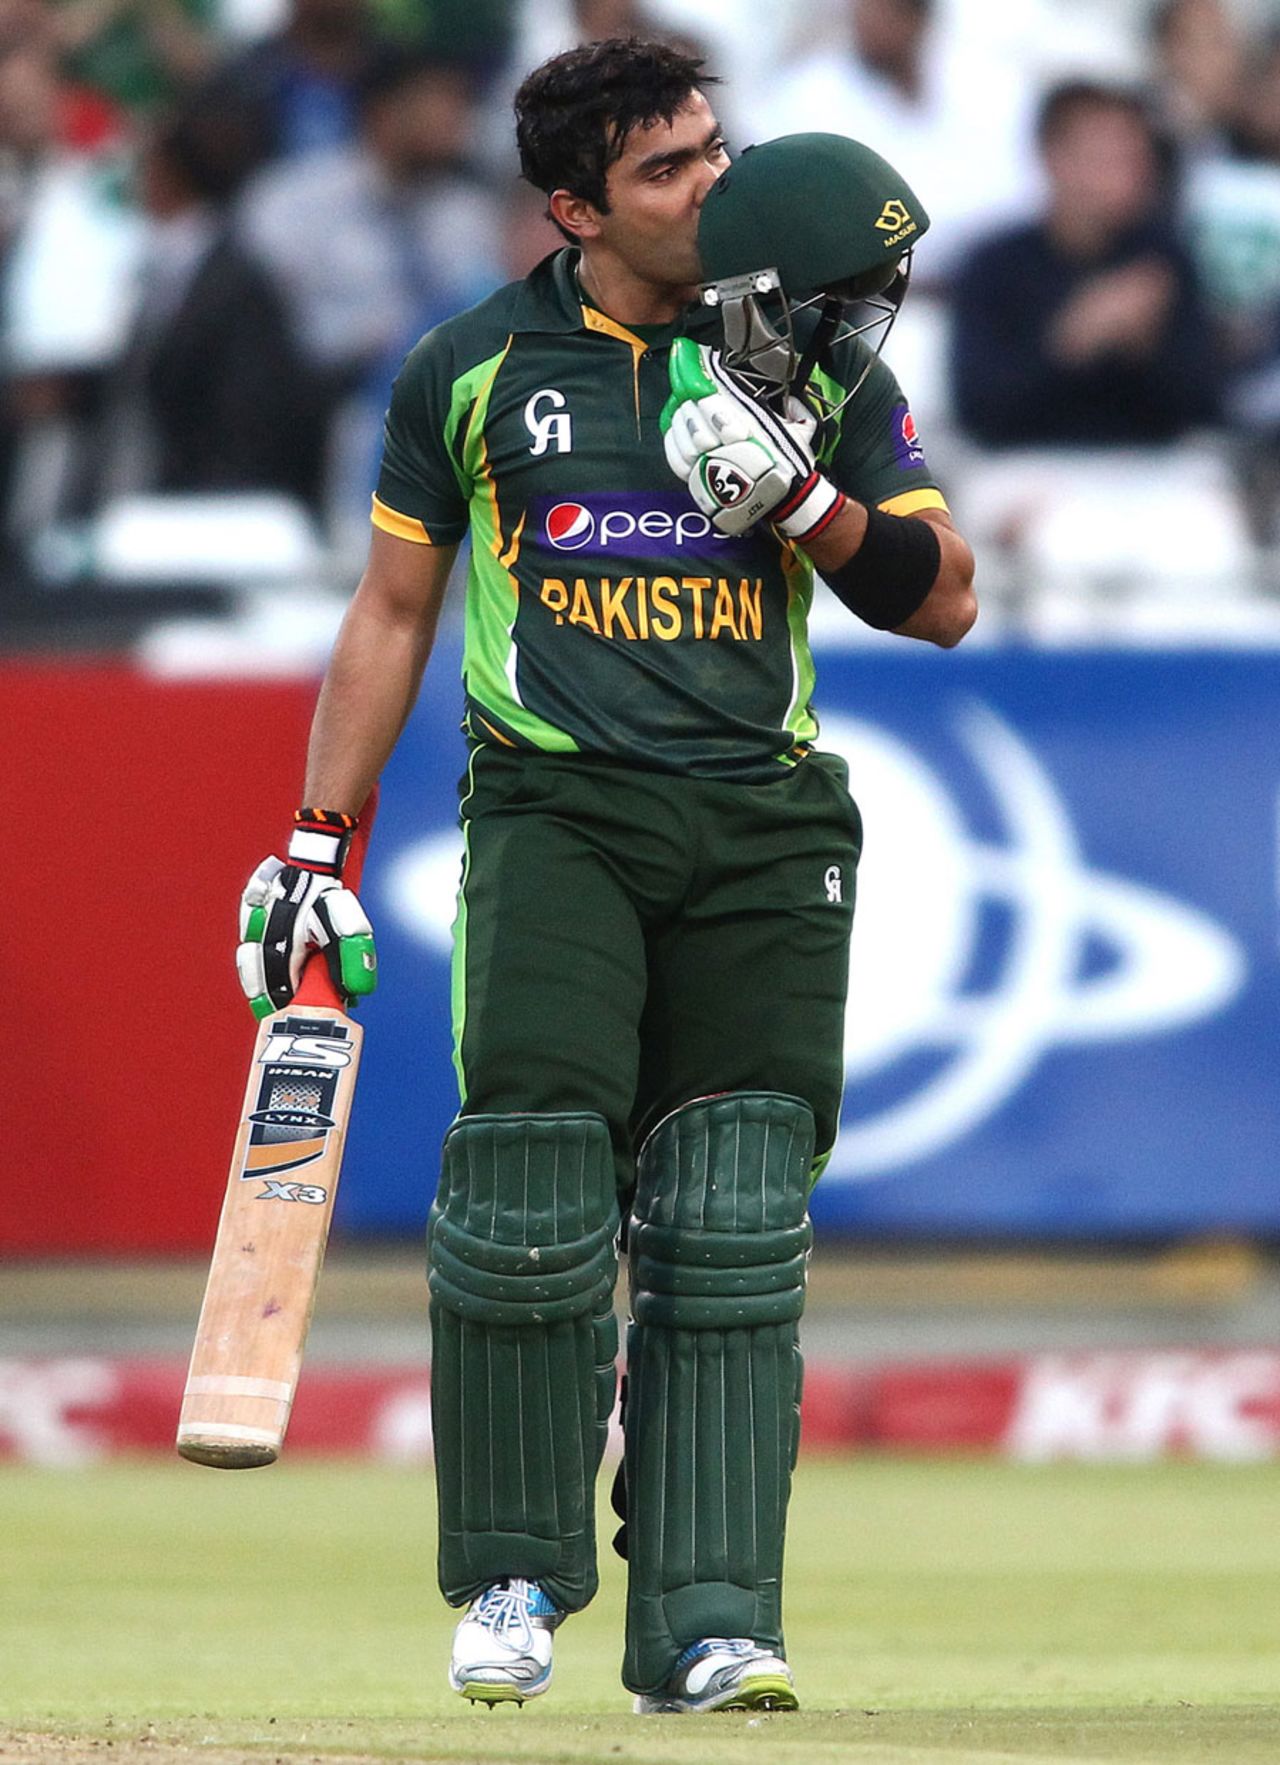 Umar Akmal kisses his helmet after getting a fifty, South Africa v Pakistan, 2nd T20I, Cape Town, November 22, 2013 